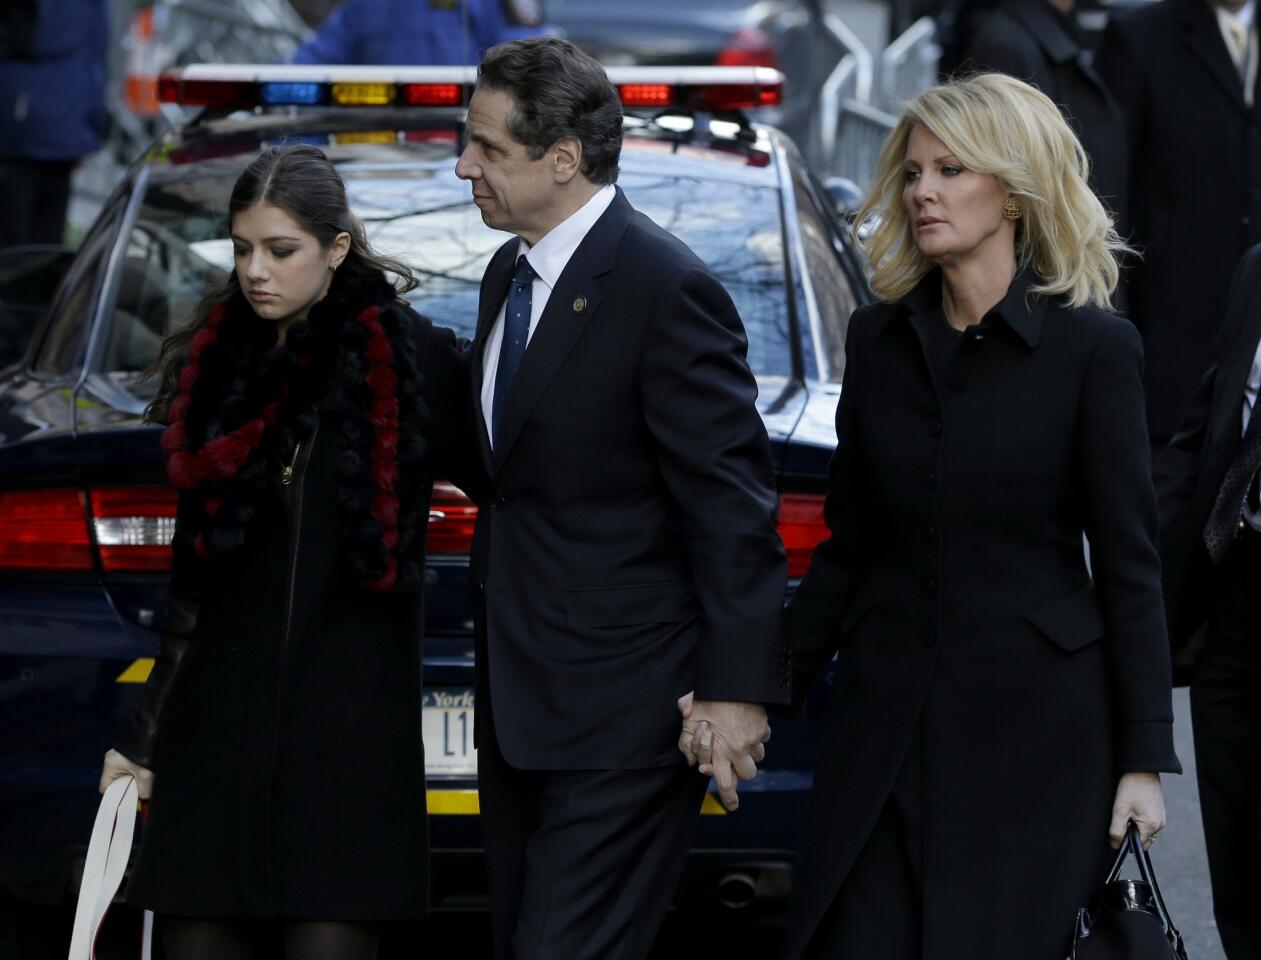 New York Gov. Andrew Cuomo arrives at his father's wake in Manhattan. With him are his daughter, Michaela, left, and his girlfriend, Sandra Lee.